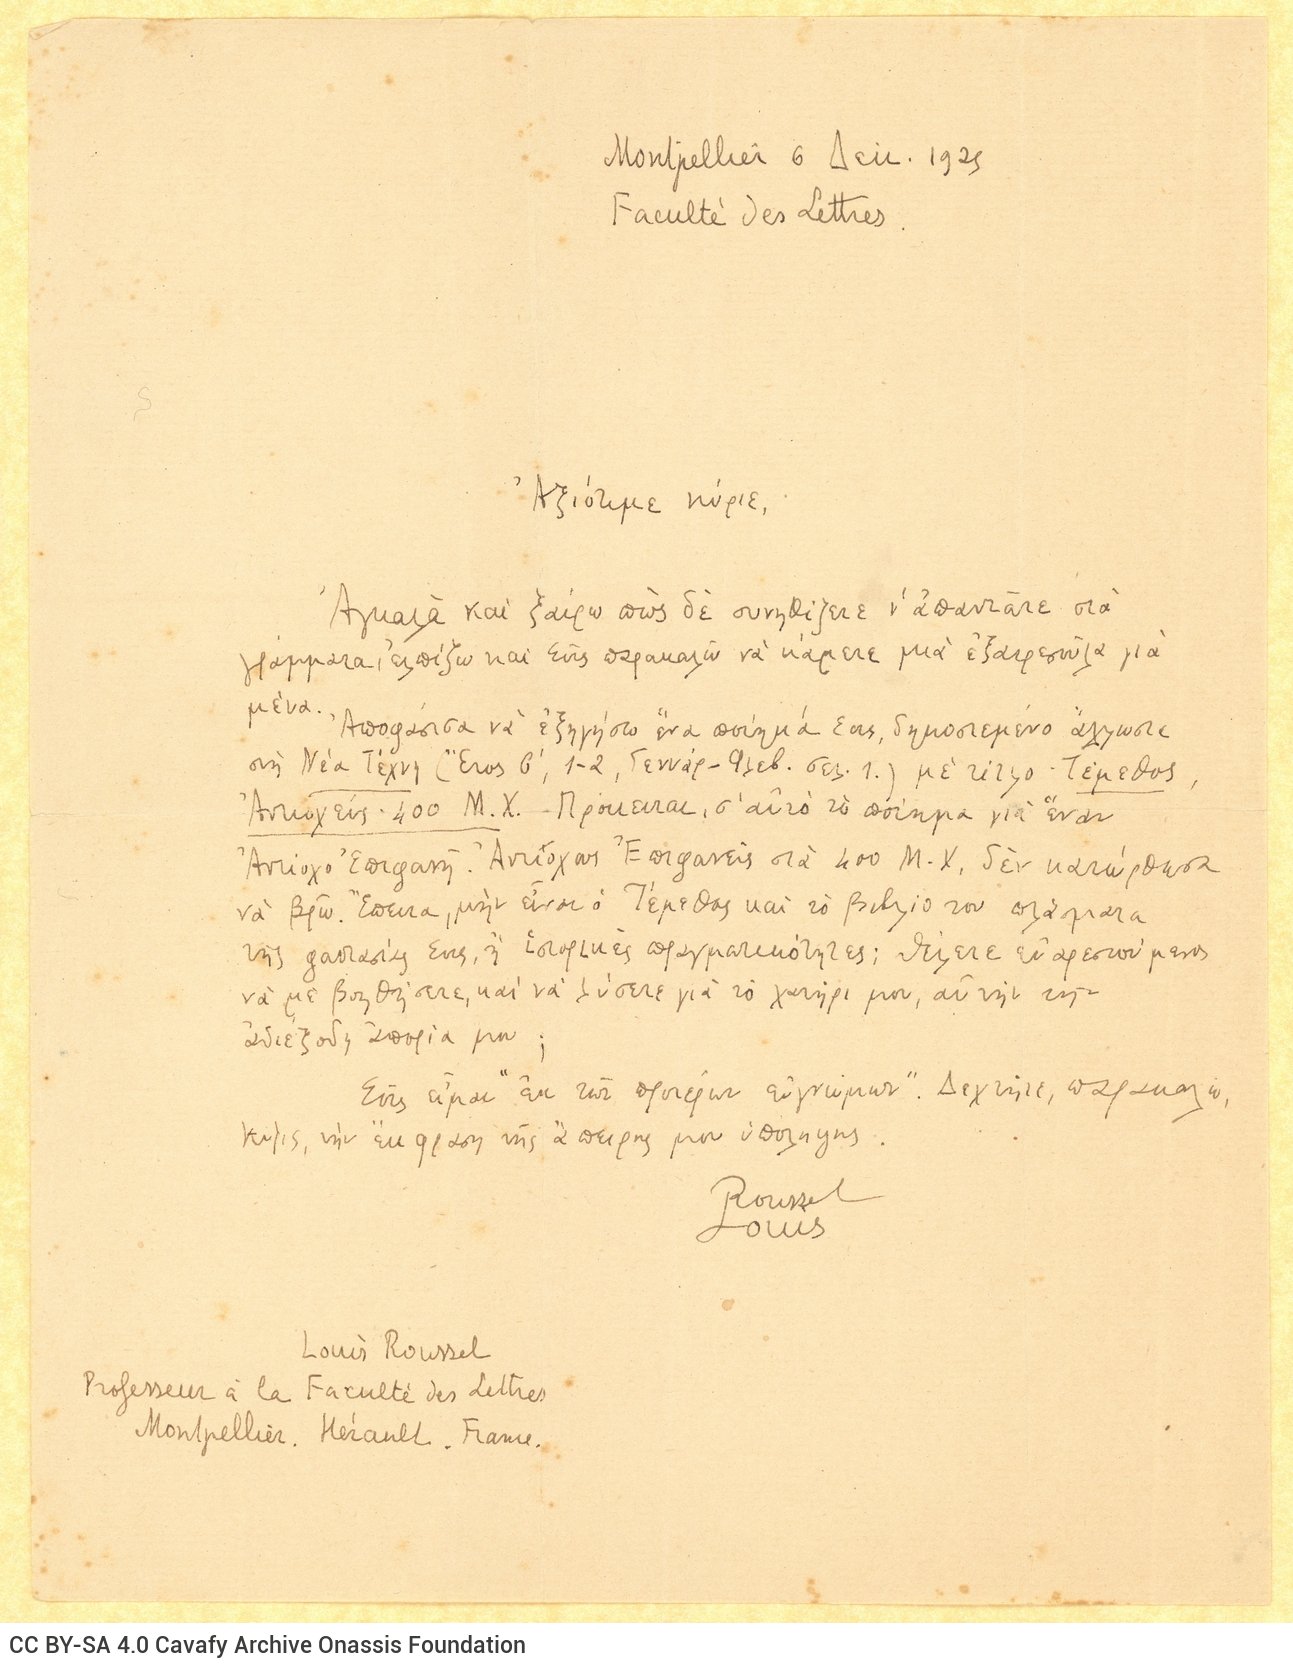 Handwritten letter by Louis Roussel to Cavafy on one side of a sheet. Blank verso. The author sets forth his queries and asks